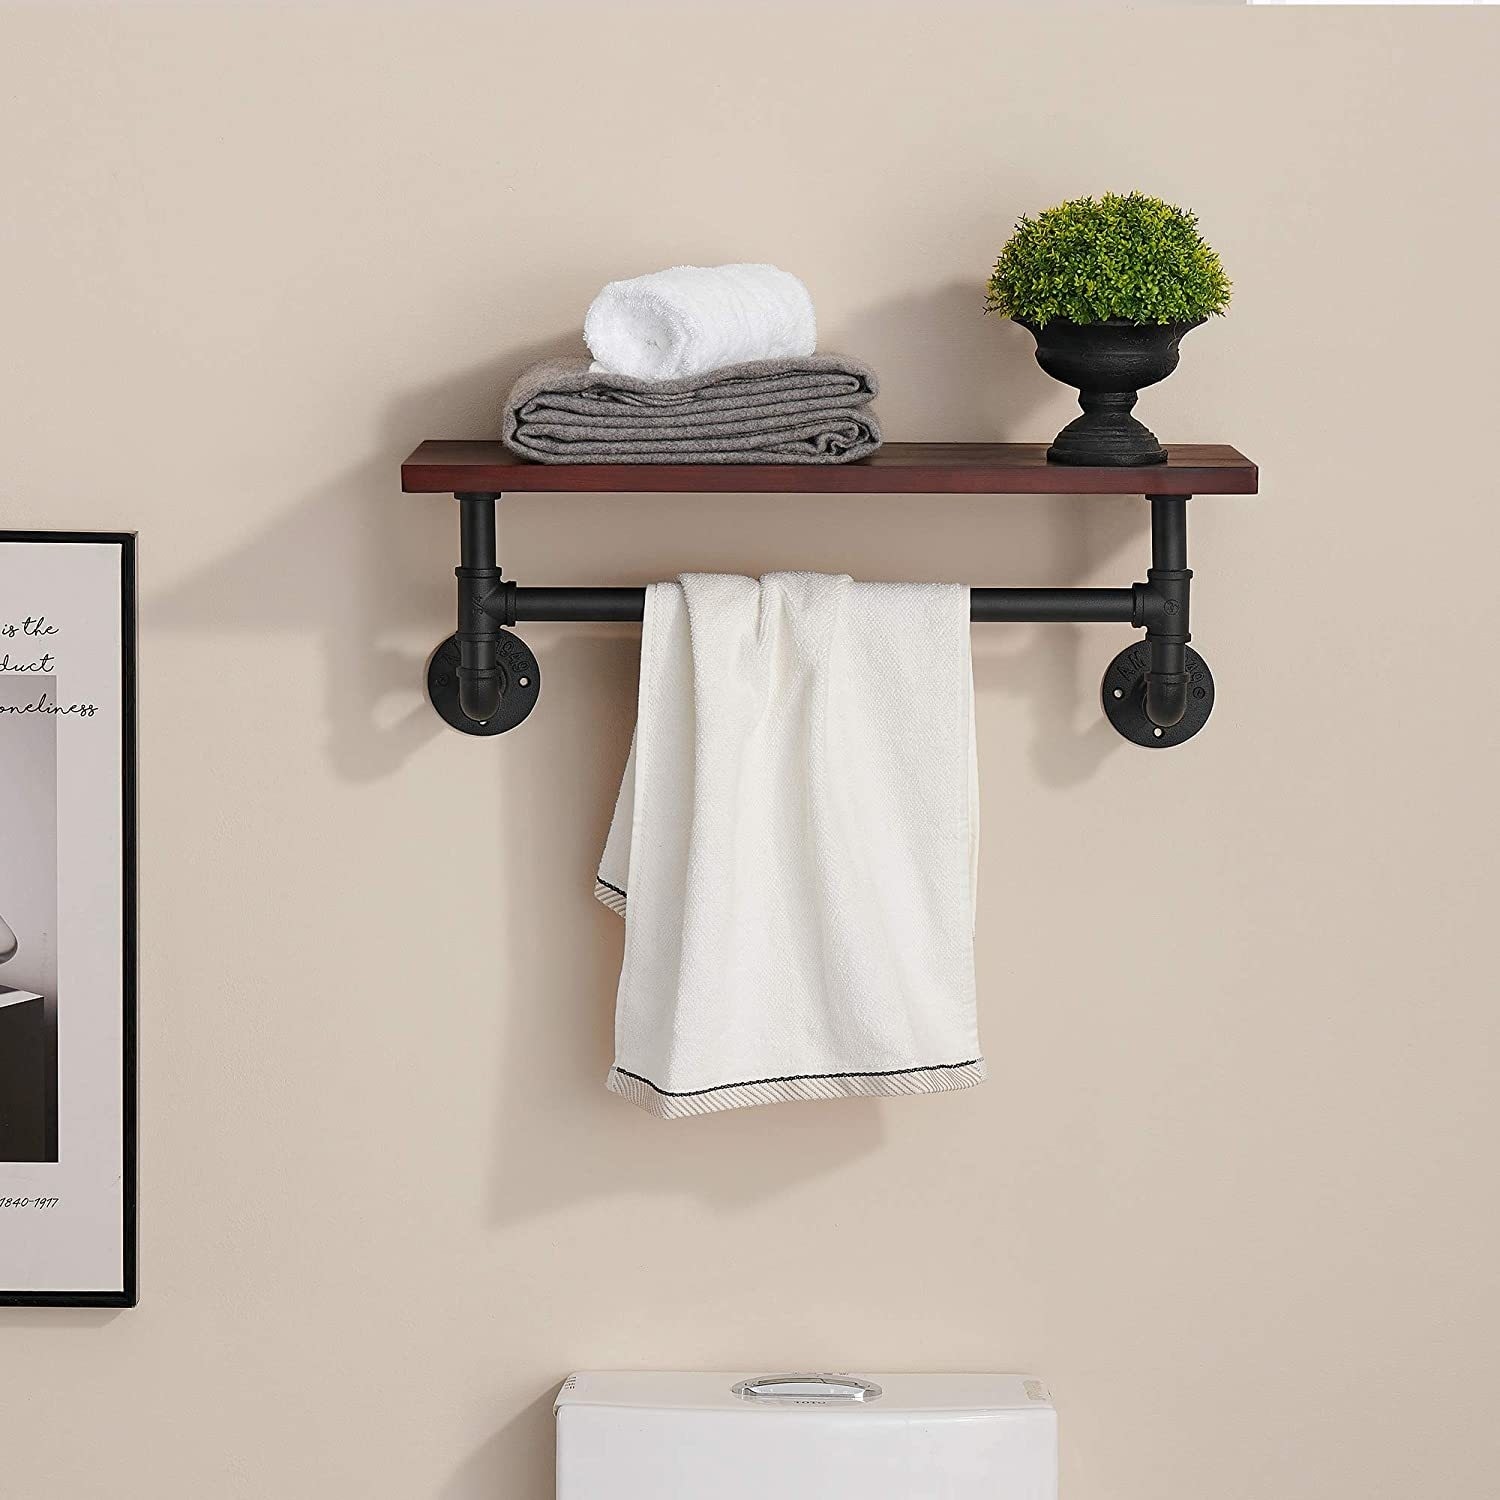 https://ak1.ostkcdn.com/images/products/is/images/direct/252d6876abe69f405c8ef23d06ff556431b09ddf/Ivinta-Industrial-Pipe-Bathroom-Wall-Shelf%2C-Rustic-Wall-Mounted-Storage-Shelves-with-Towel-Bar-for-Bathroom-Kitchen.jpg